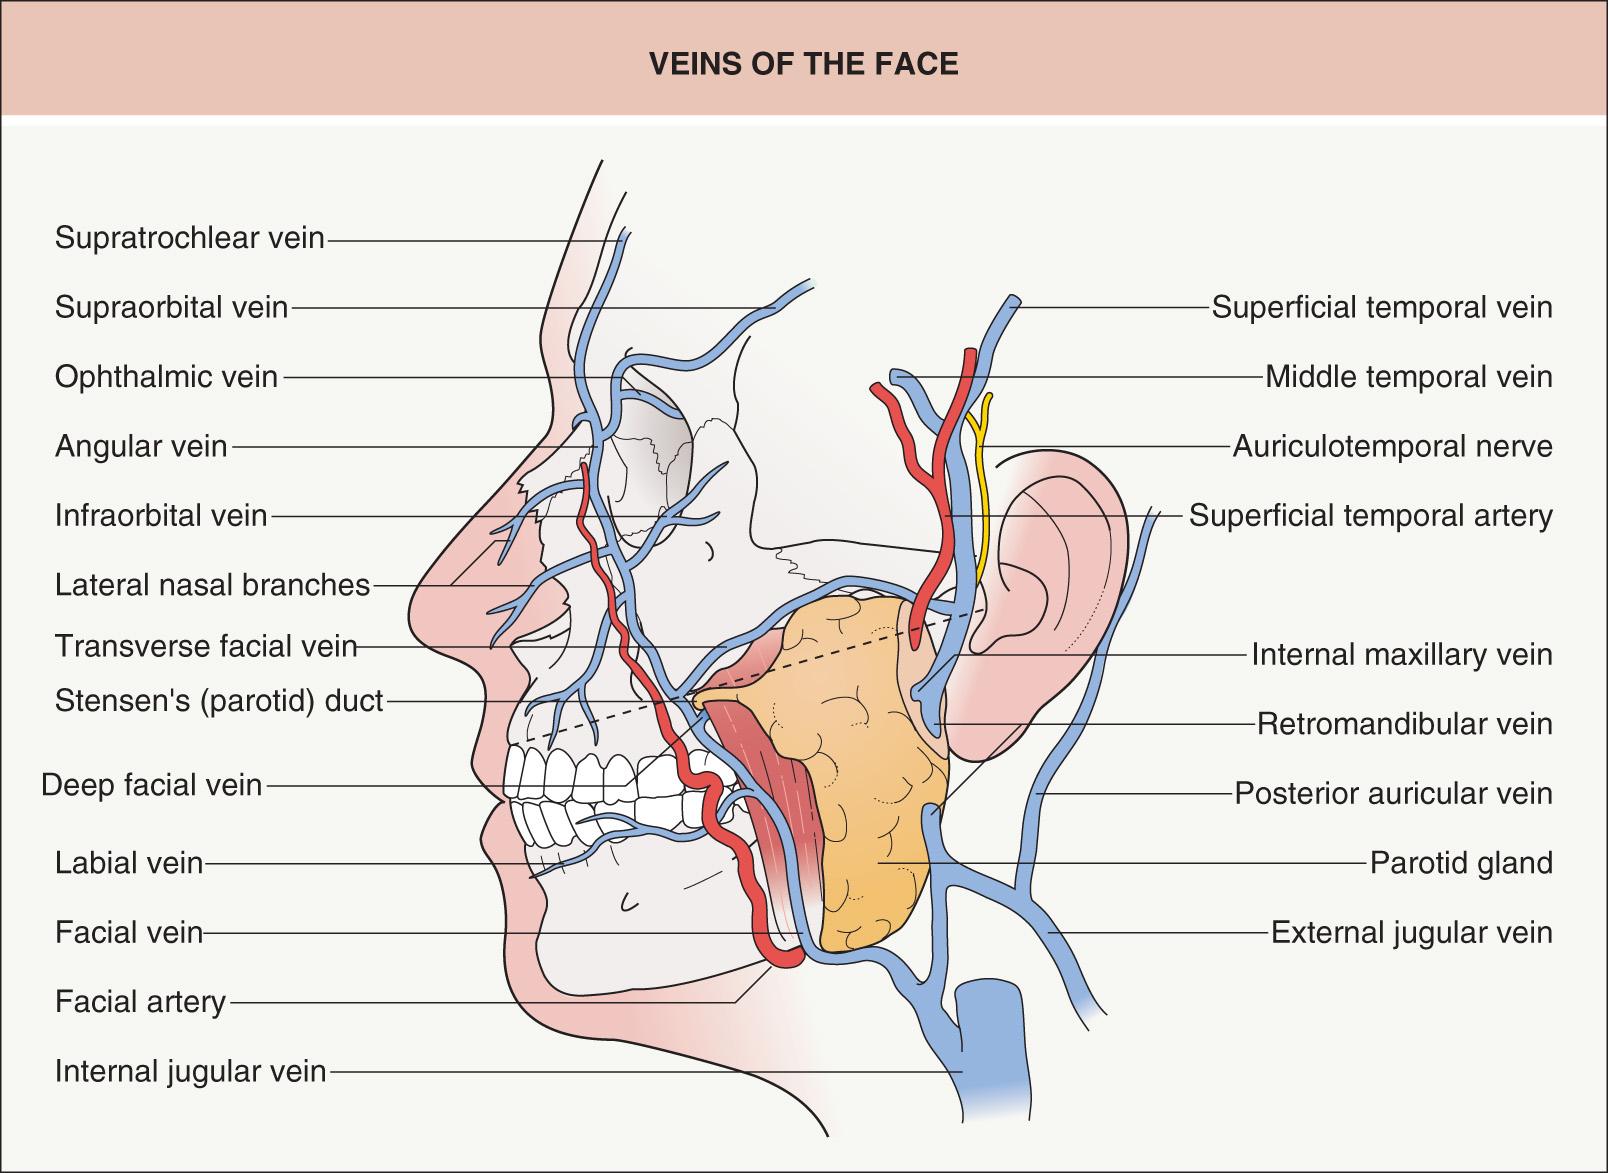 Fig. 142.3, Veins of the face.